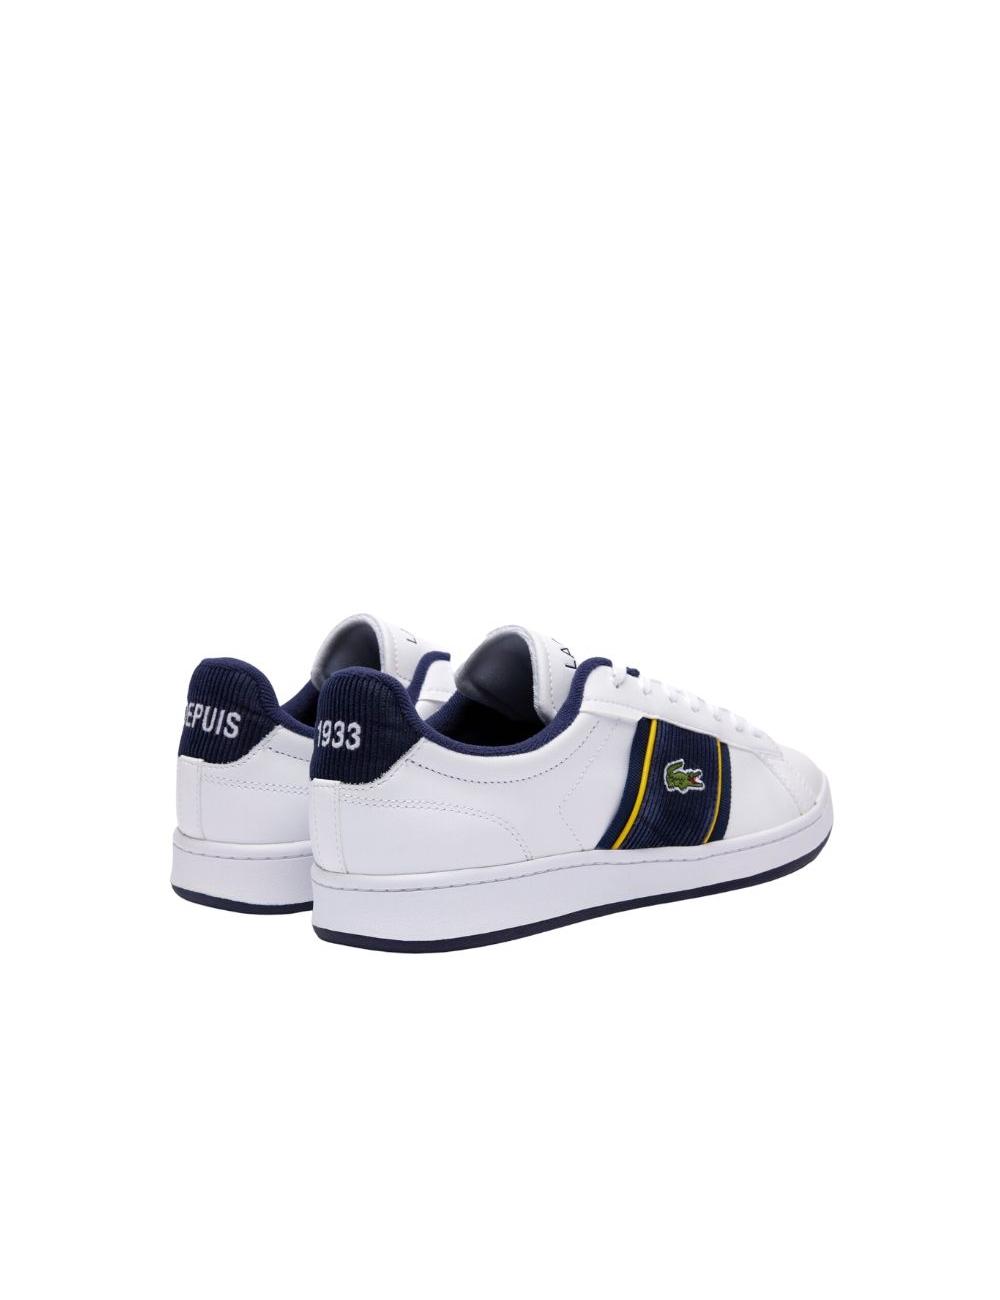 SNEAKER HOMBRE LACOSTE CARNABY PRO CGR BAR 46SMA0038